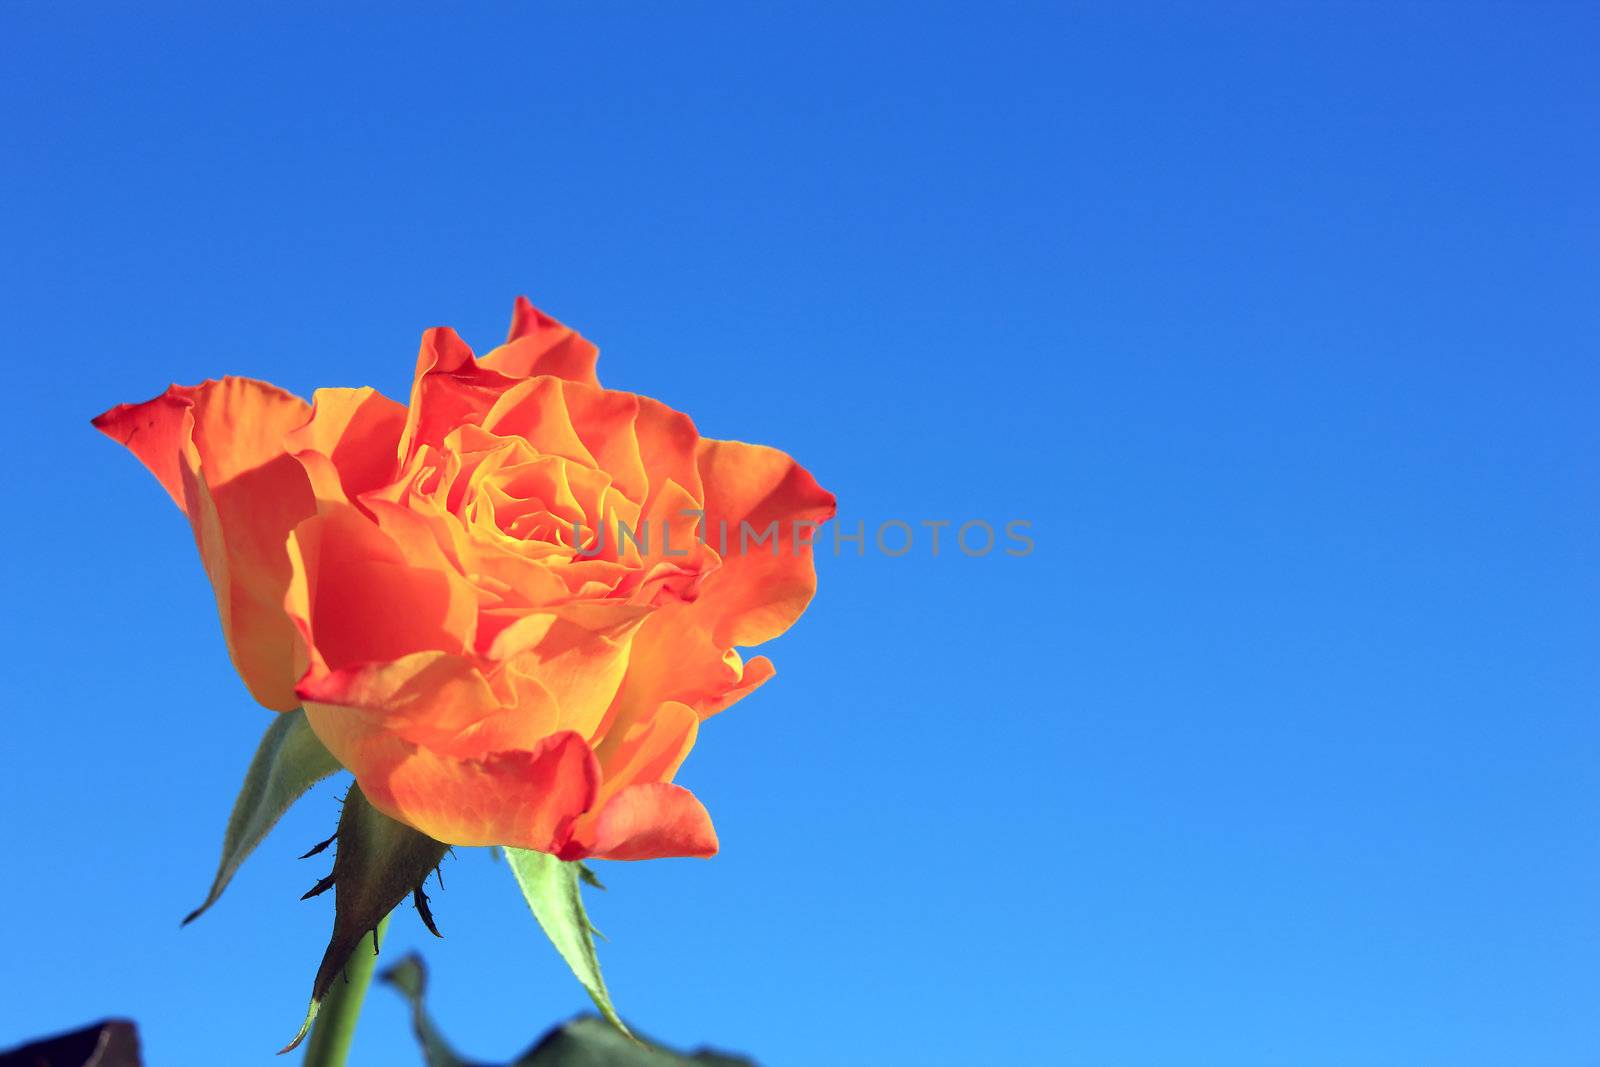 Close view of a beautiful orange rose on a blue background